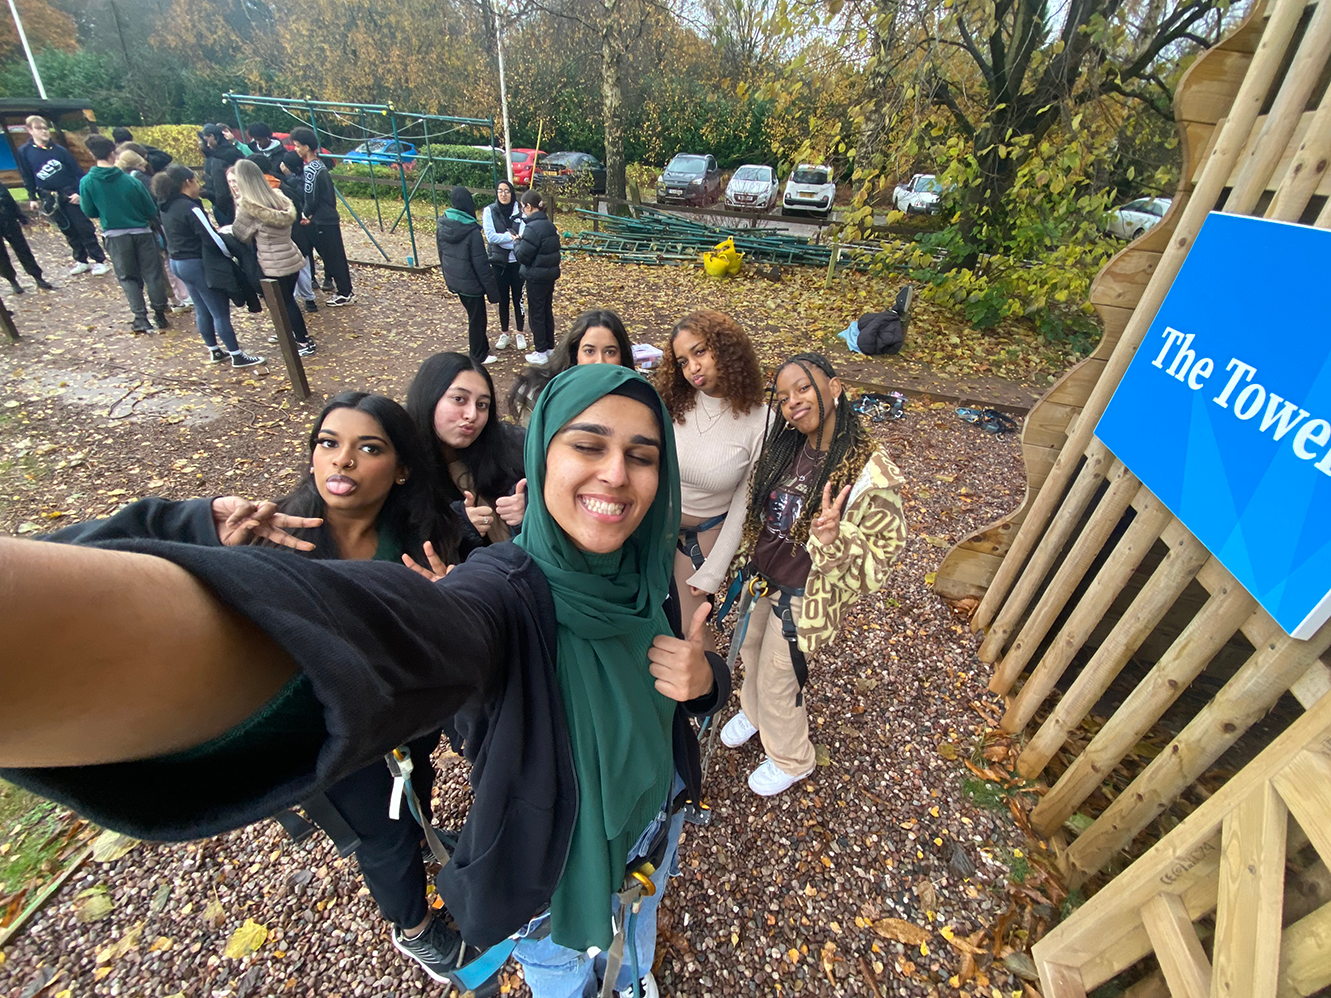 A young woman wearing a head scarf is taking a selfie with Rihanna and four other friends outside. They’re standing close to a tower assault course.